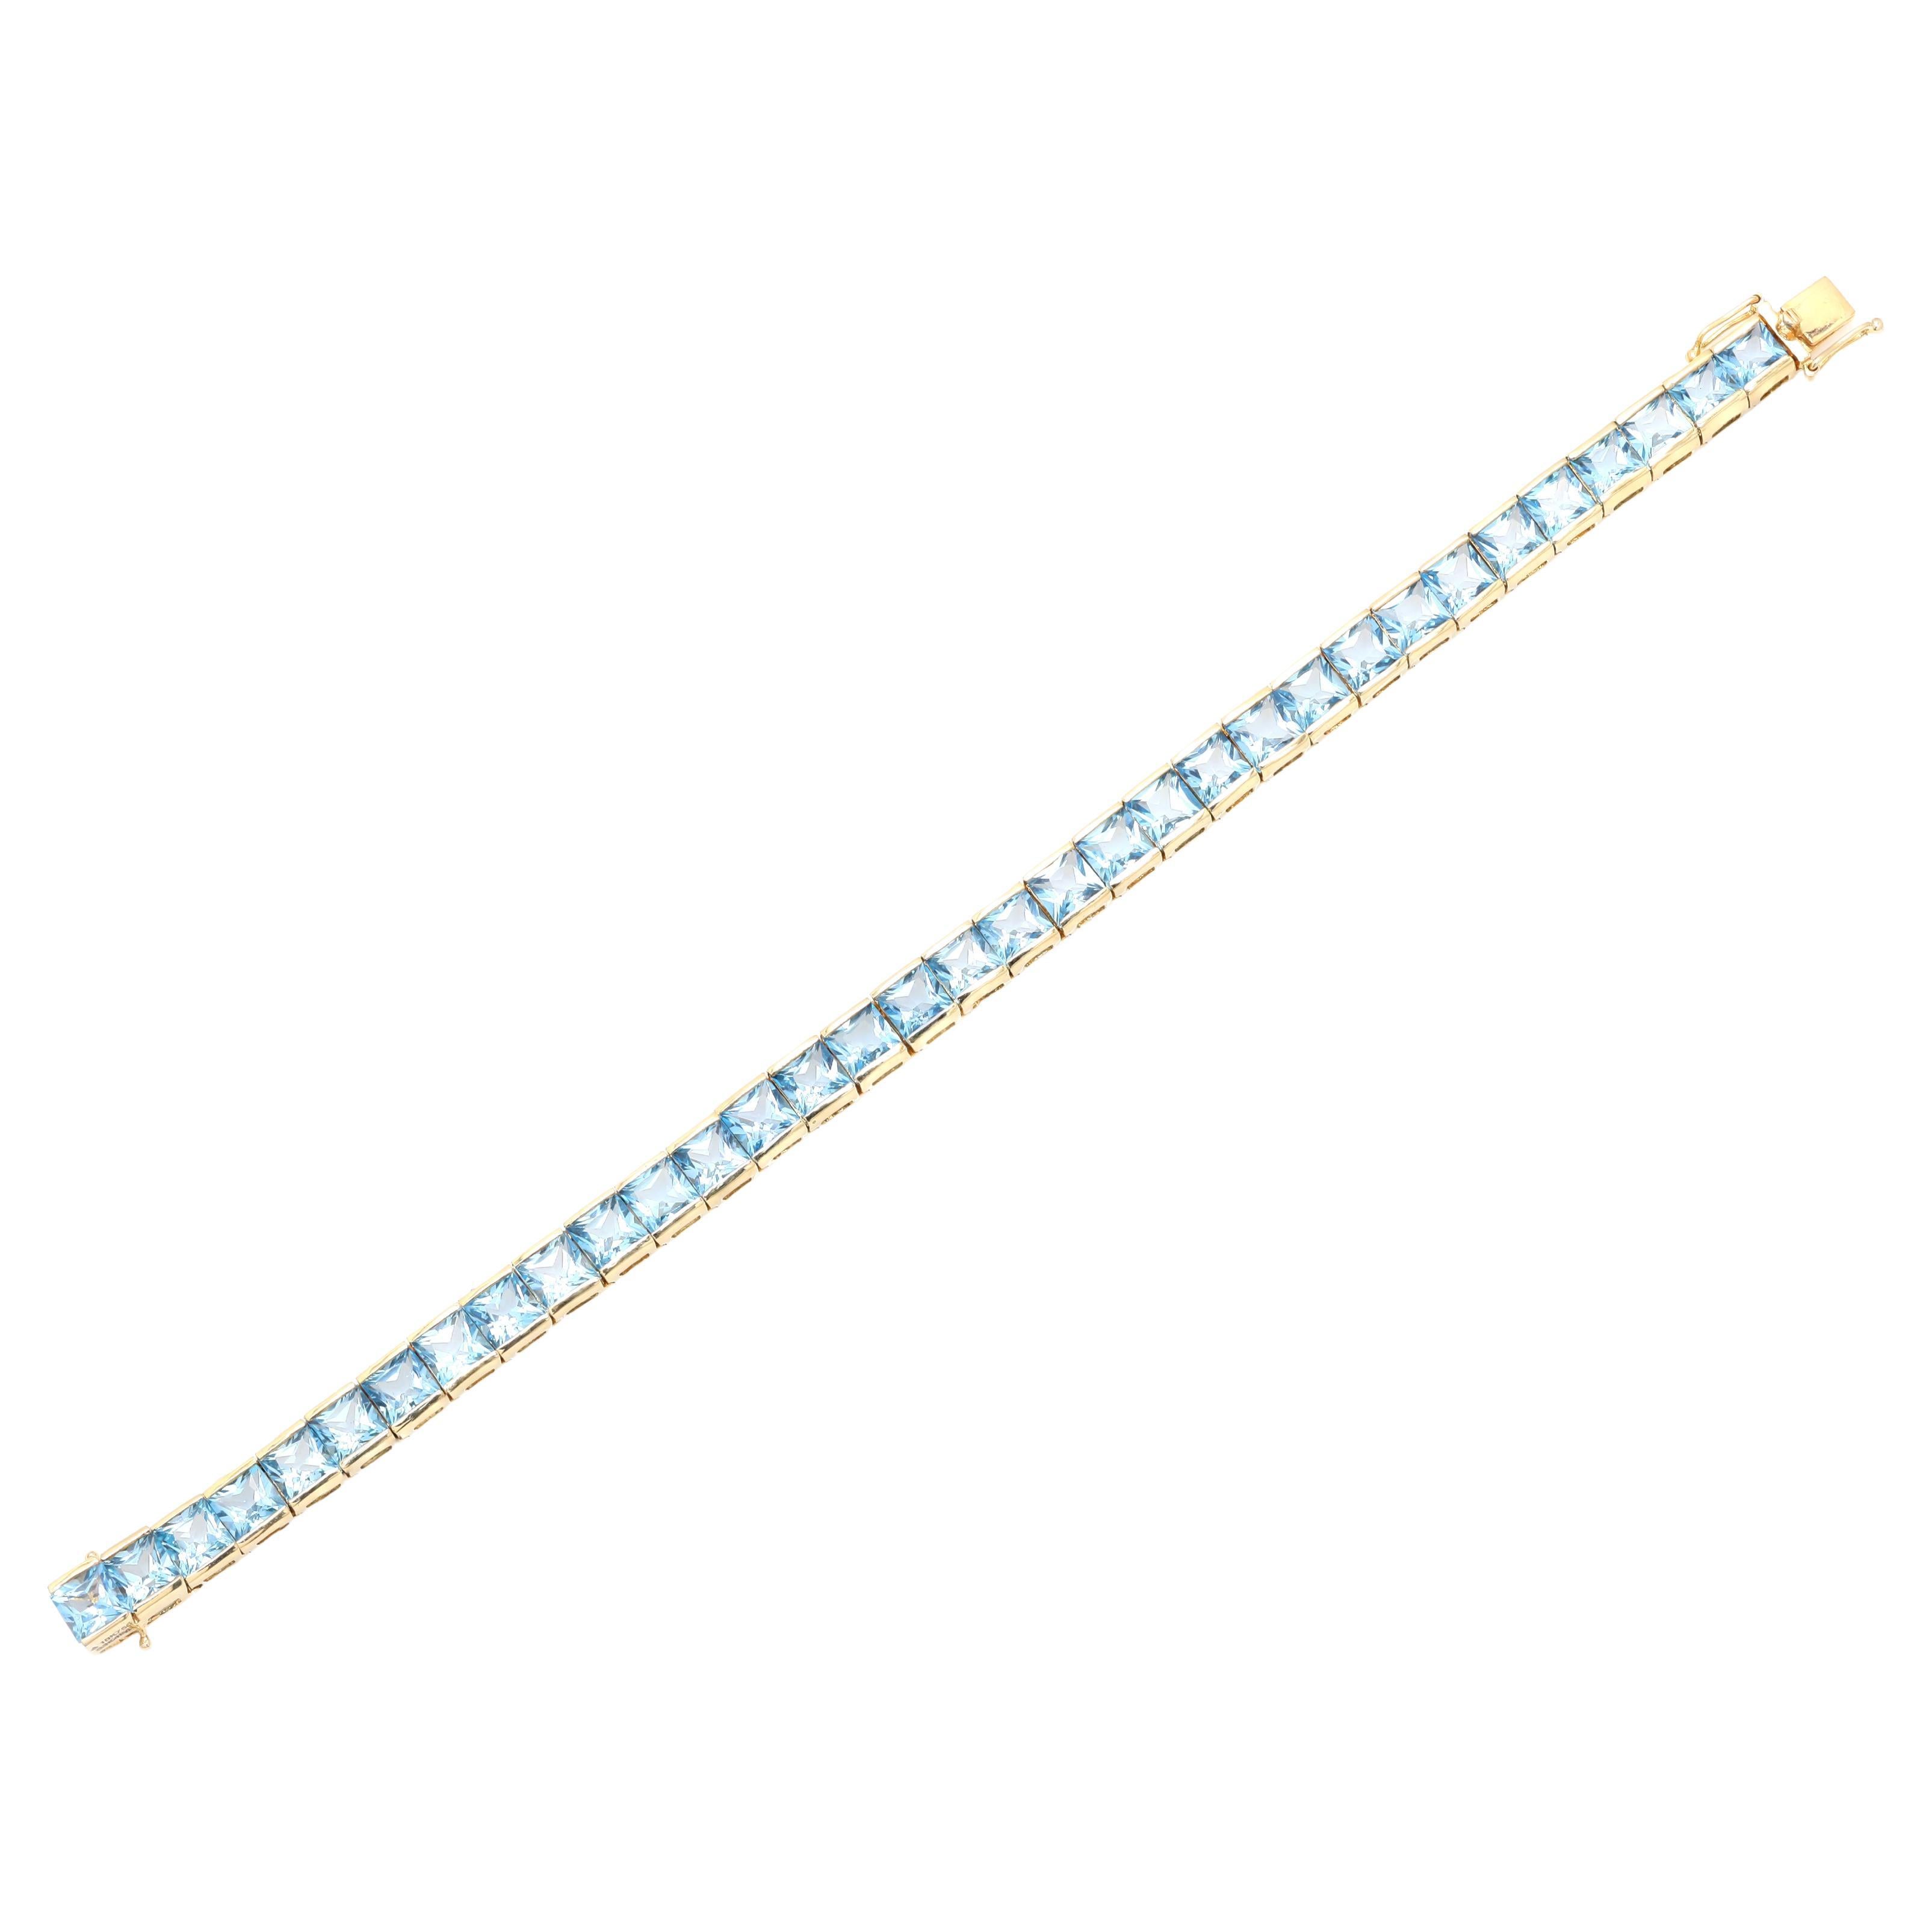 This Mesmerizing Blue Topaz Tennis Bracelet in 18K gold showcases 34 endlessly sparkling natural blue topaz, weighing 13.65 carat. It measures 7 inches long in length. 
Blue topaz provides inner peace and mental stability.
Designed with perfect